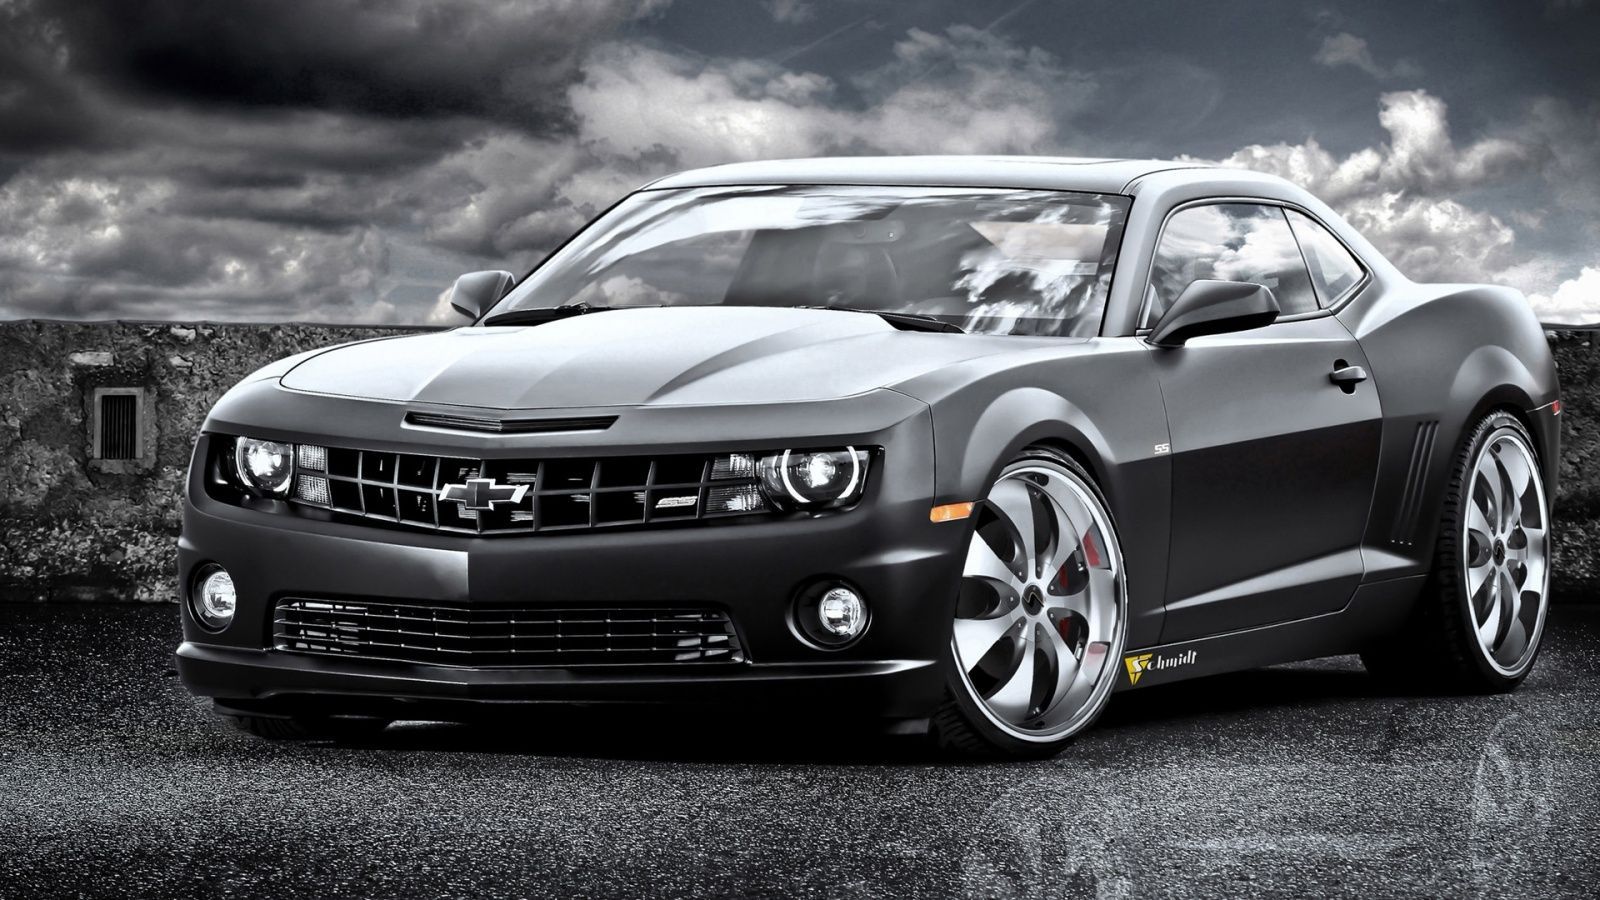 Chevrolet Camaro SS Wallpapers | HD Wallpapers